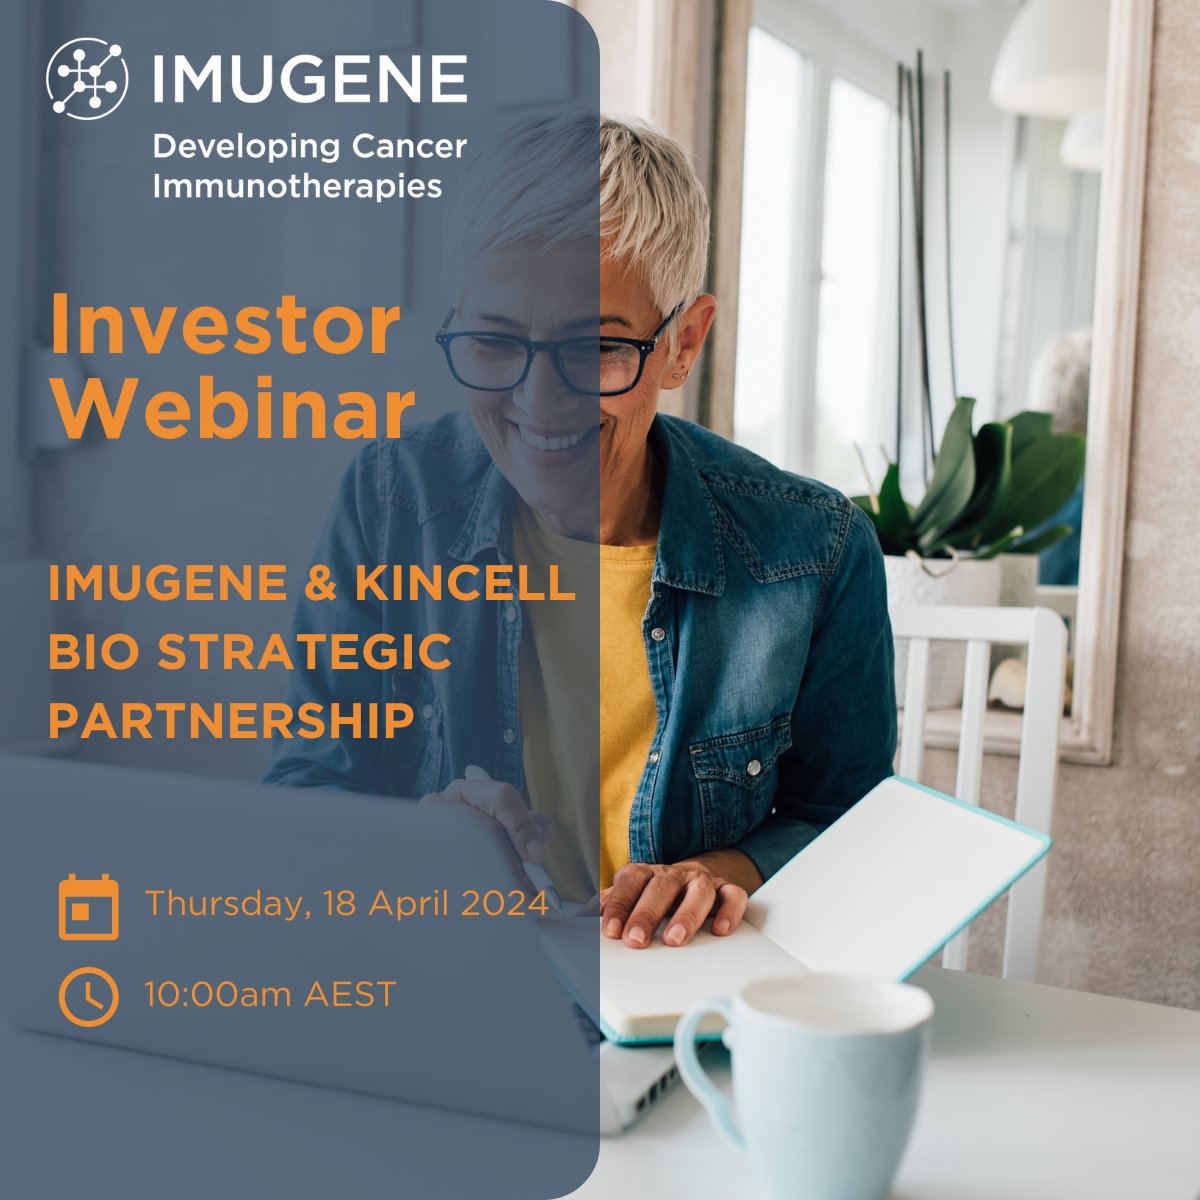 We will hold an investor webinar on Thursday, 18 April 2024, at 10am AEST to discuss the strategic partnership announced with Kincell Bio. Presenting as part of the webinar will be our MD and CEO Leslie Chong, COO Dr Bradley Glover and Kincell Bio's CEO Dr Bruce Thompson. It…